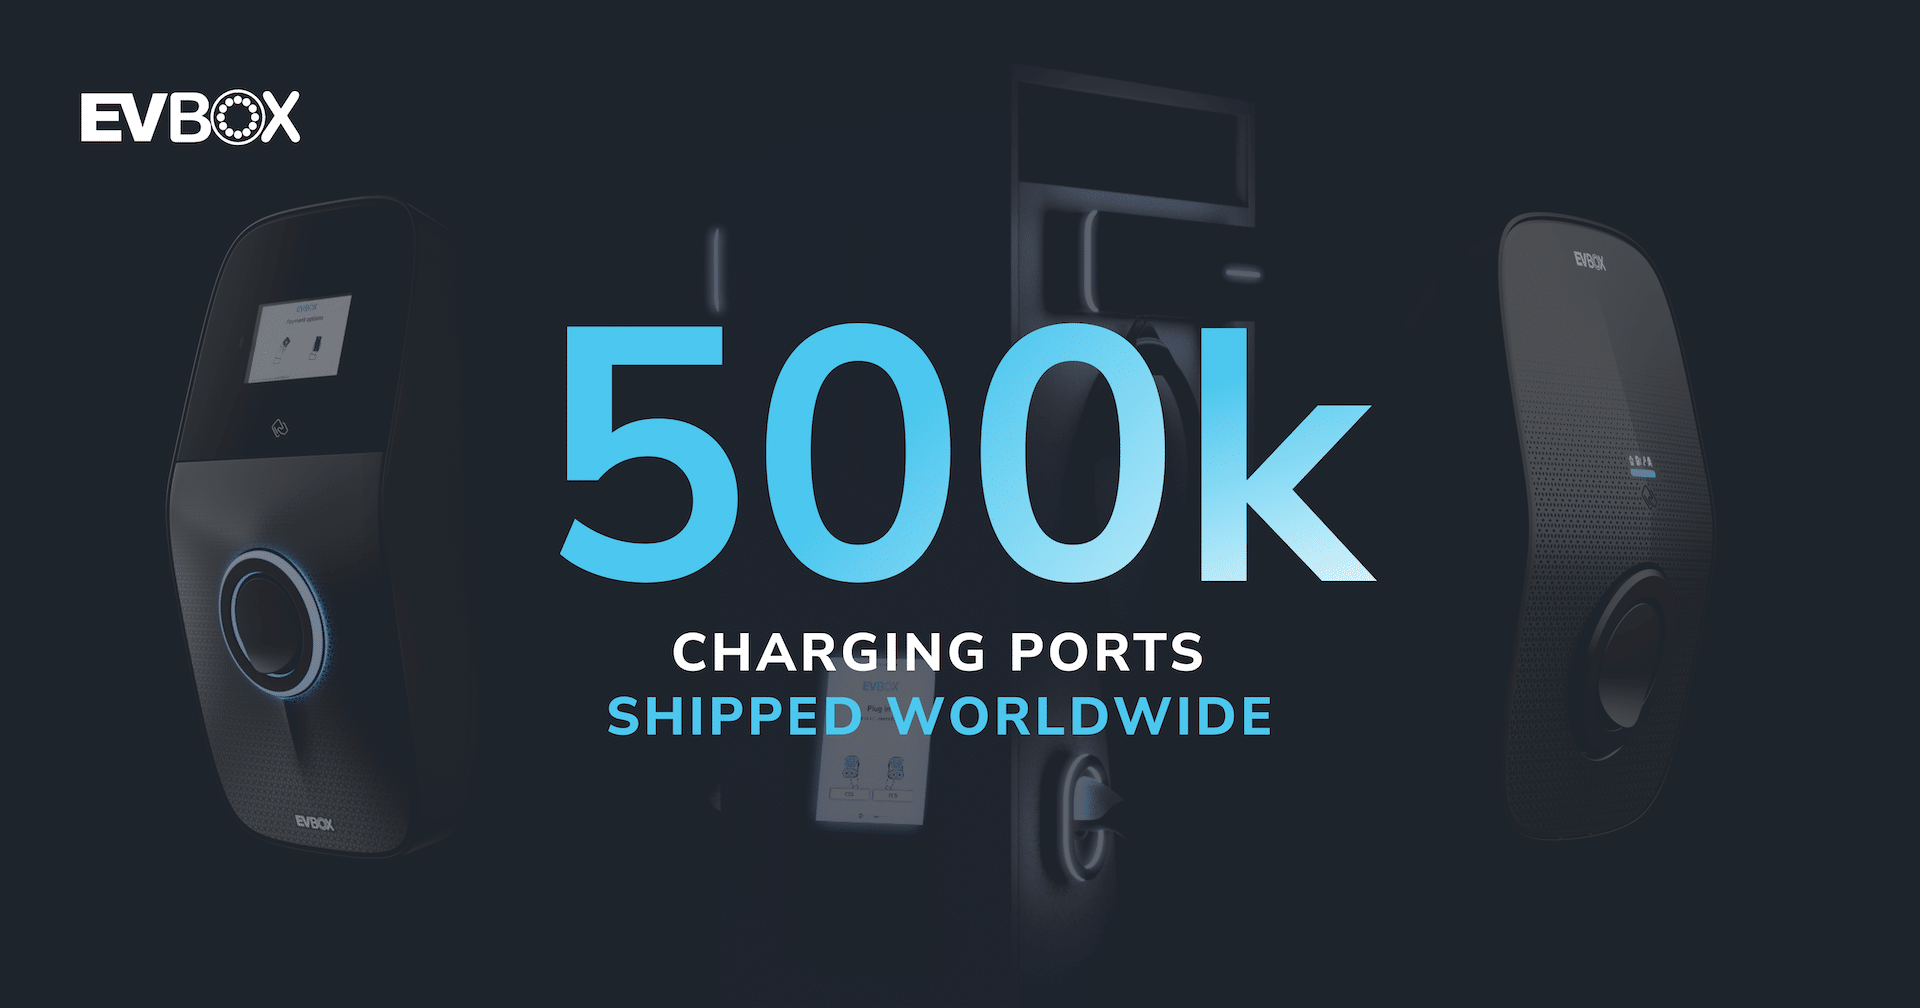 EVBox ships 500,000 charging ports globally to accelerate EV adoption